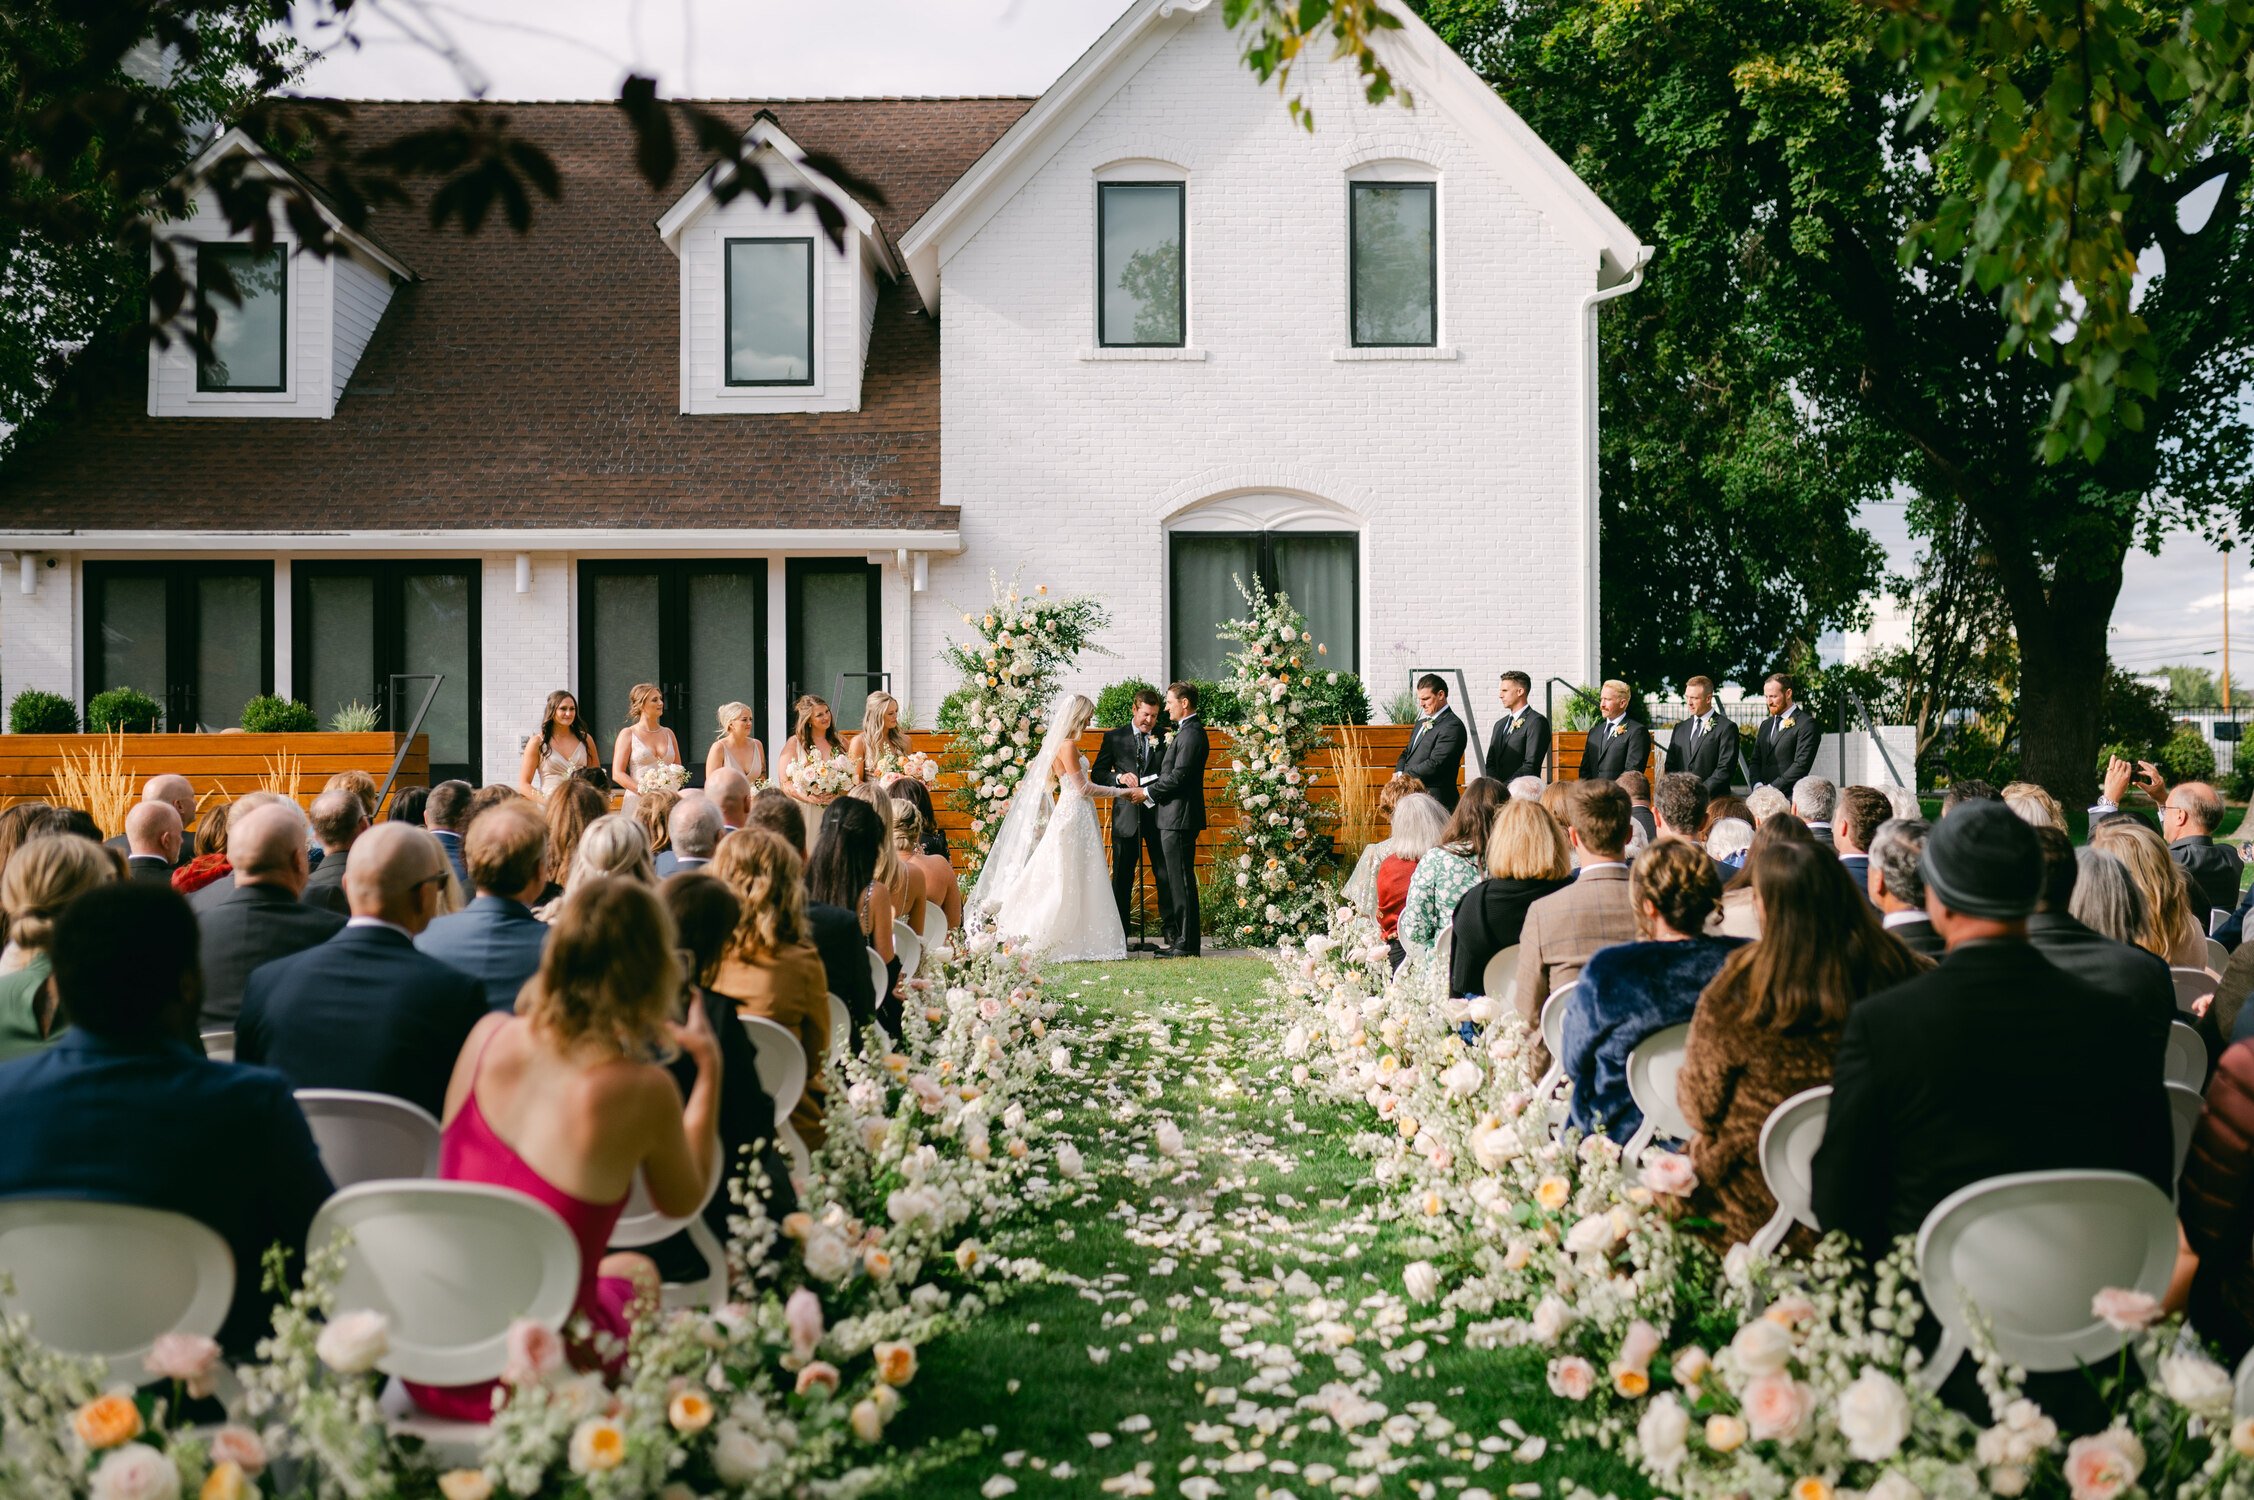 Elm Estate Wedding photos, photo of the bride and groom and guests during the outdoor garden ceremony